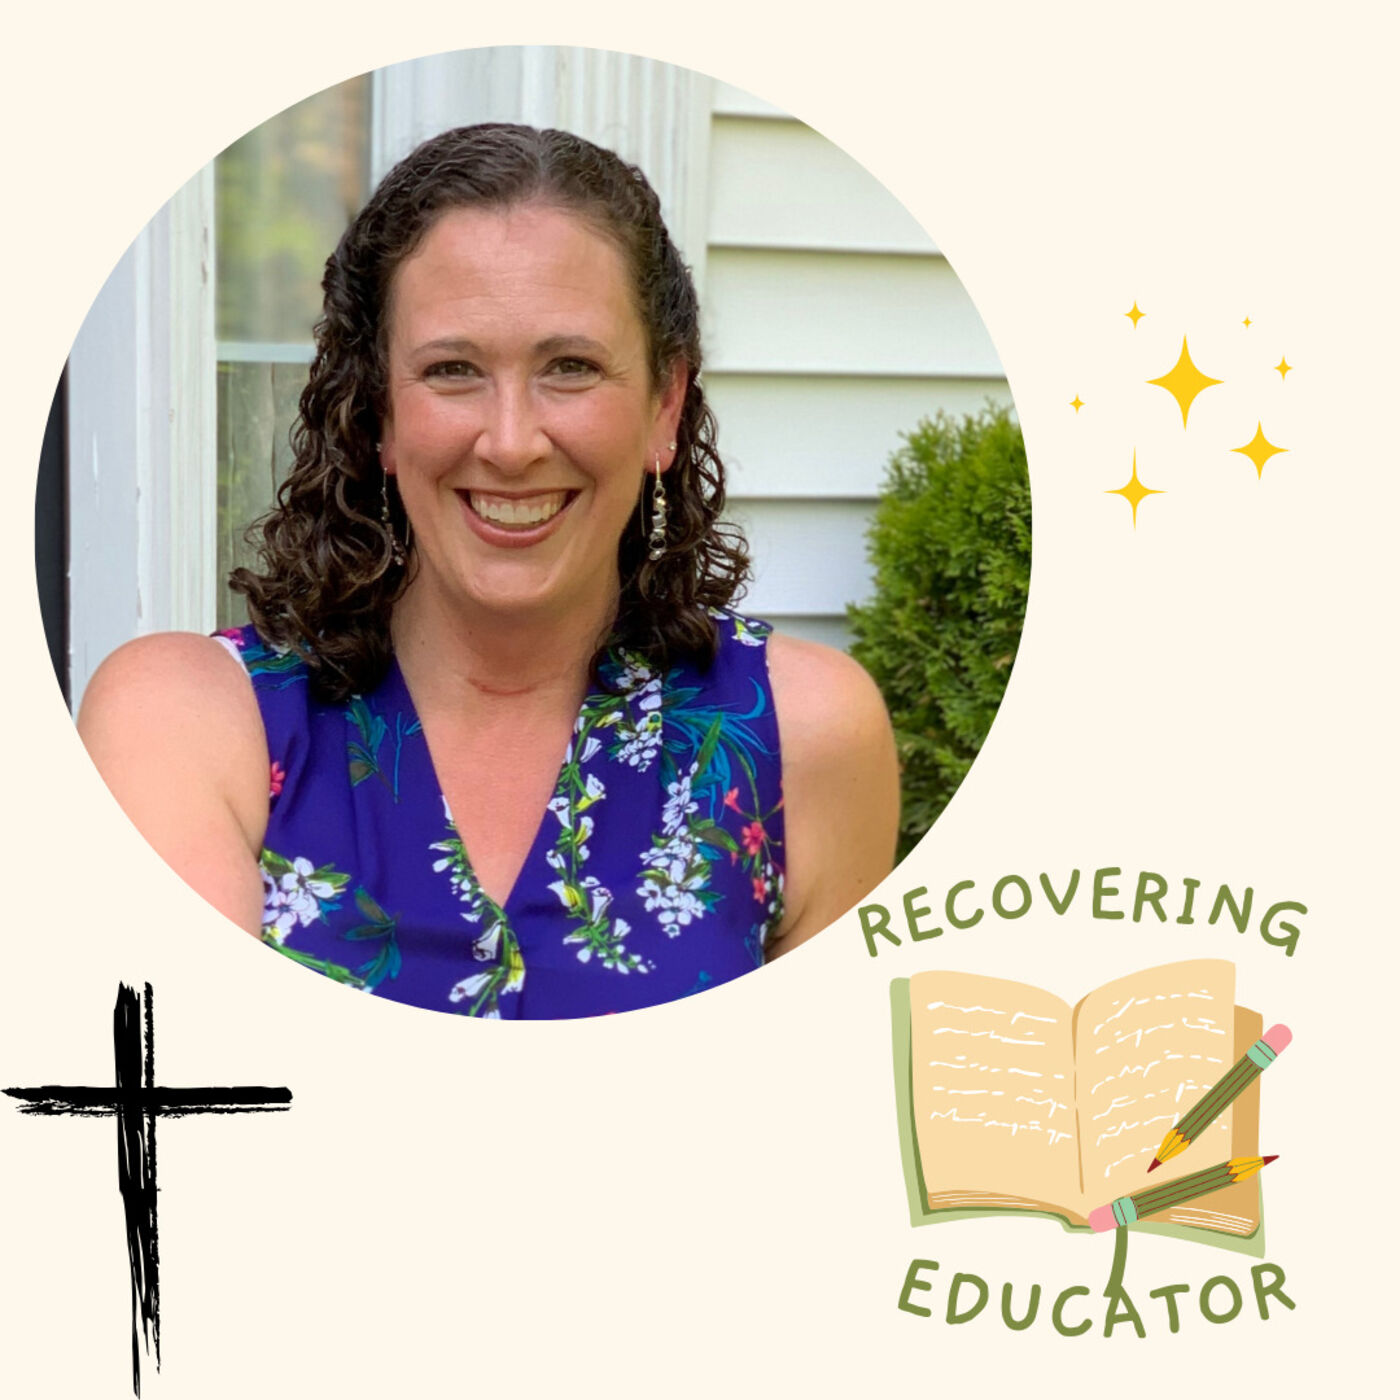 Dr. Naomi Hall “The Recovering Educator” on Faith, Balance, and Beating Burnout